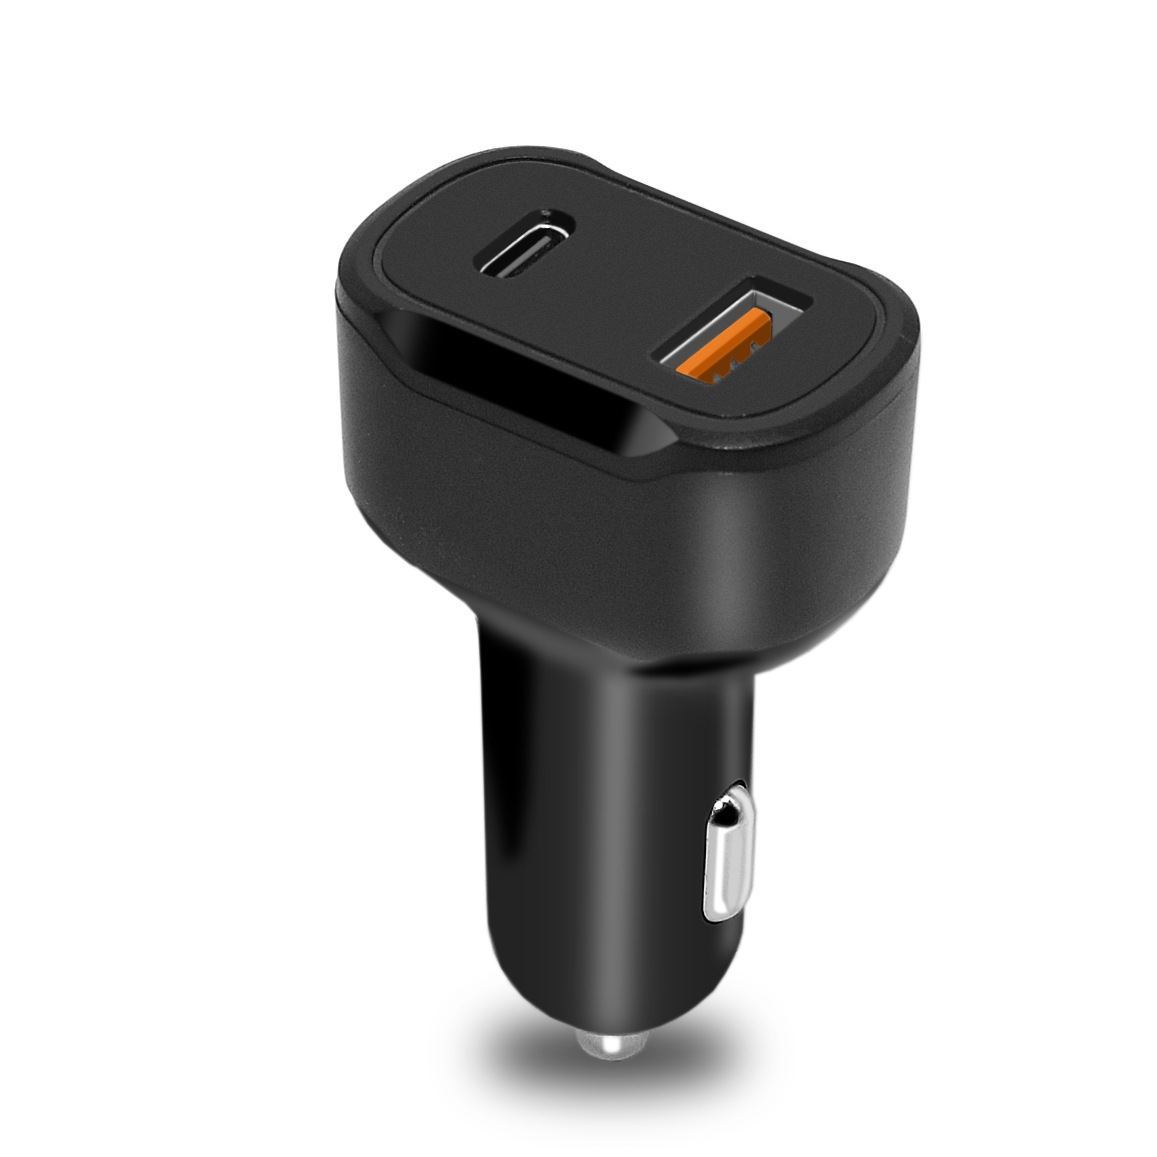 4. LM-C09PD-C PD Plus QC 36W Car Charger Bulk Purchase and Corporate purchase from China Union Power -Description-